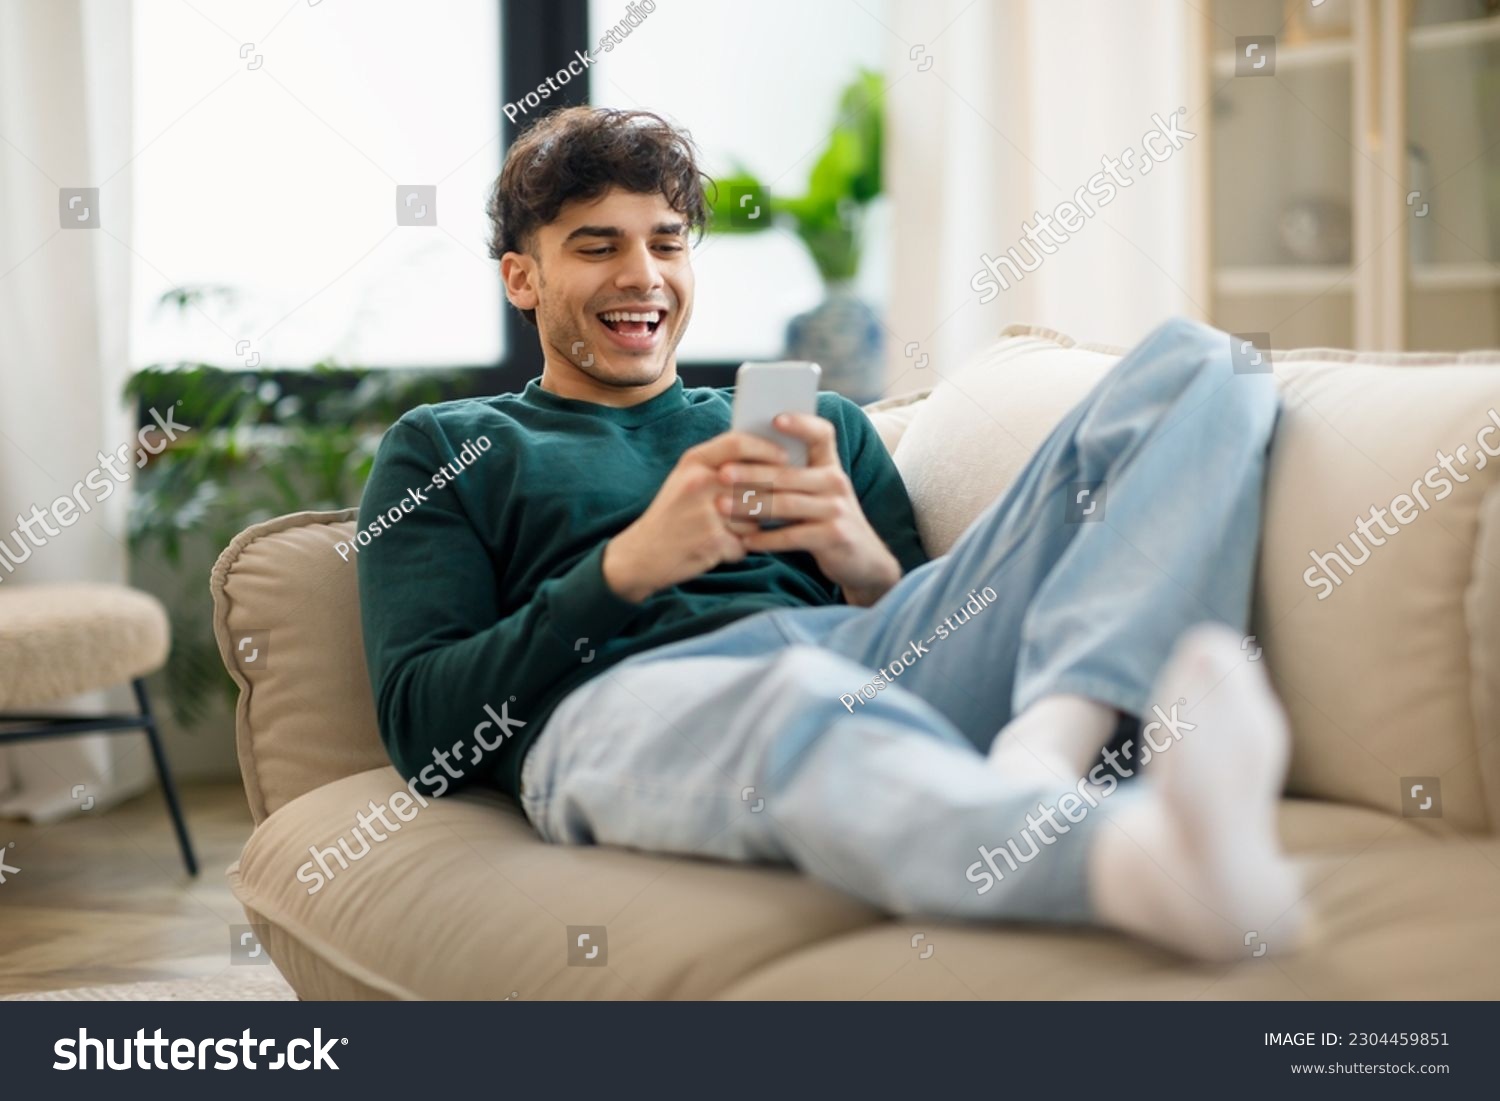 Happy Middle Eastern Young Man Using Cellphone And Laughing Texting Lying On Sofa At Home. Cheerful Man Holding Smartphone Playing Game And Networking Online Having Fun On Weekend #2304459851